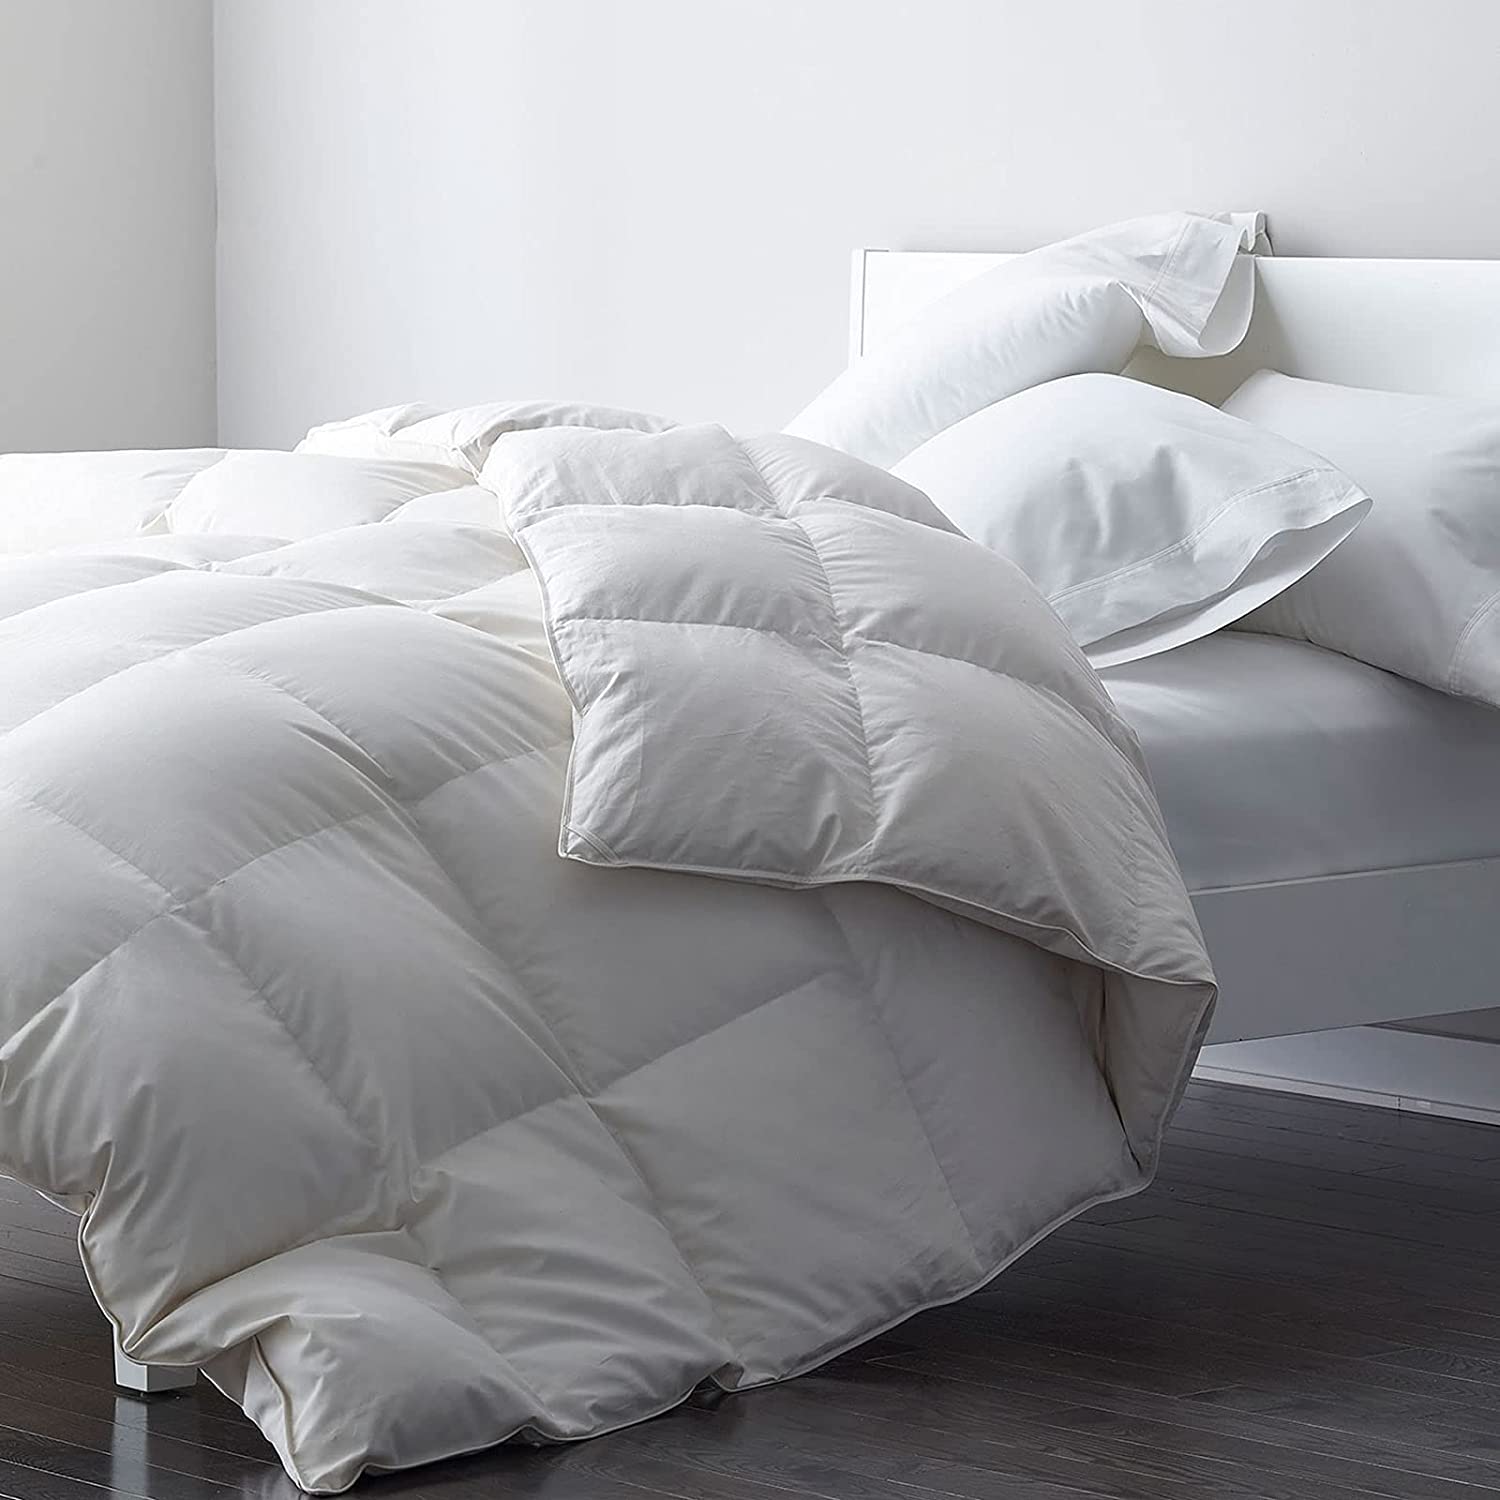 Goose or Duck Down/ Feather Duvet - Most Luxury Hotel Duvet